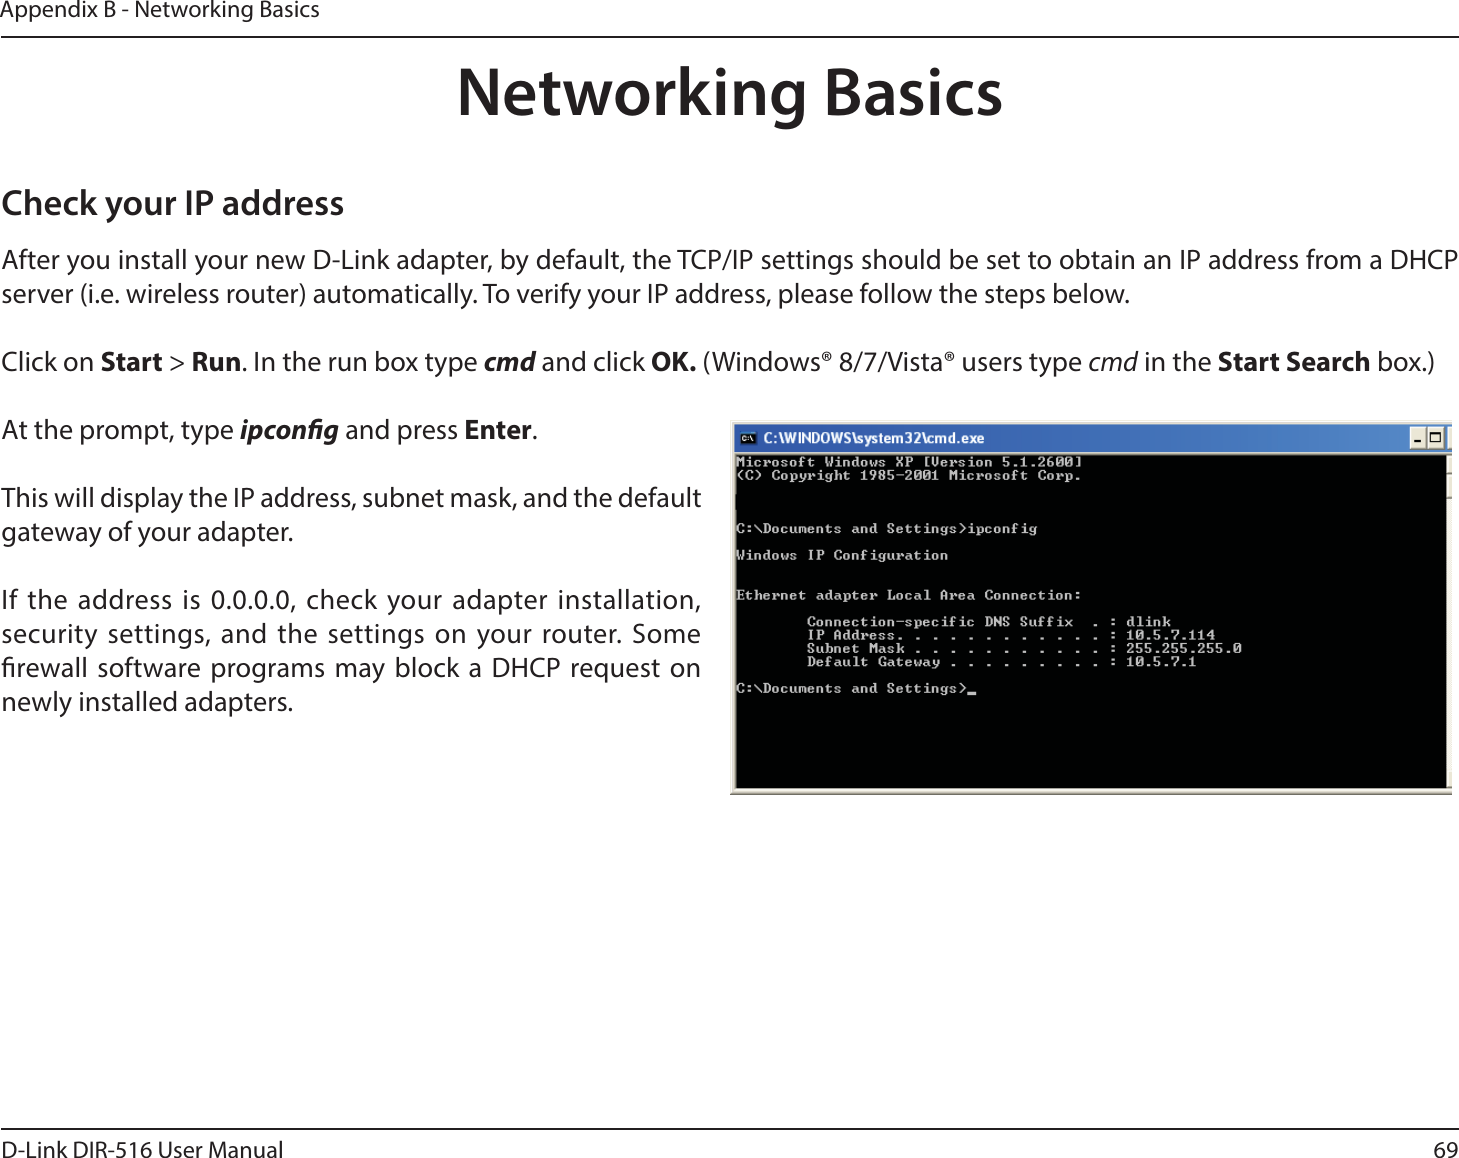 69D-Link DIR-516 User ManualAppendix B - Networking BasicsNetworking BasicsCheck your IP addressAfter you install your new D-Link adapter, by default, the TCP/IP settings should be set to obtain an IP address from a DHCP server (i.e. wireless router) automatically. To verify your IP address, please follow the steps below.Click on Start &gt; Run. In the run box type cmd and click OK. (Windows® 8/7/Vista® users type cmd in the Start Search box.)At the prompt, type ipcong and press Enter.This will display the IP address, subnet mask, and the default gateway of your adapter.If the address is 0.0.0.0, check your adapter installation, security settings, and the settings on your router. Some rewall software programs may block a DHCP request on newly installed adapters. 